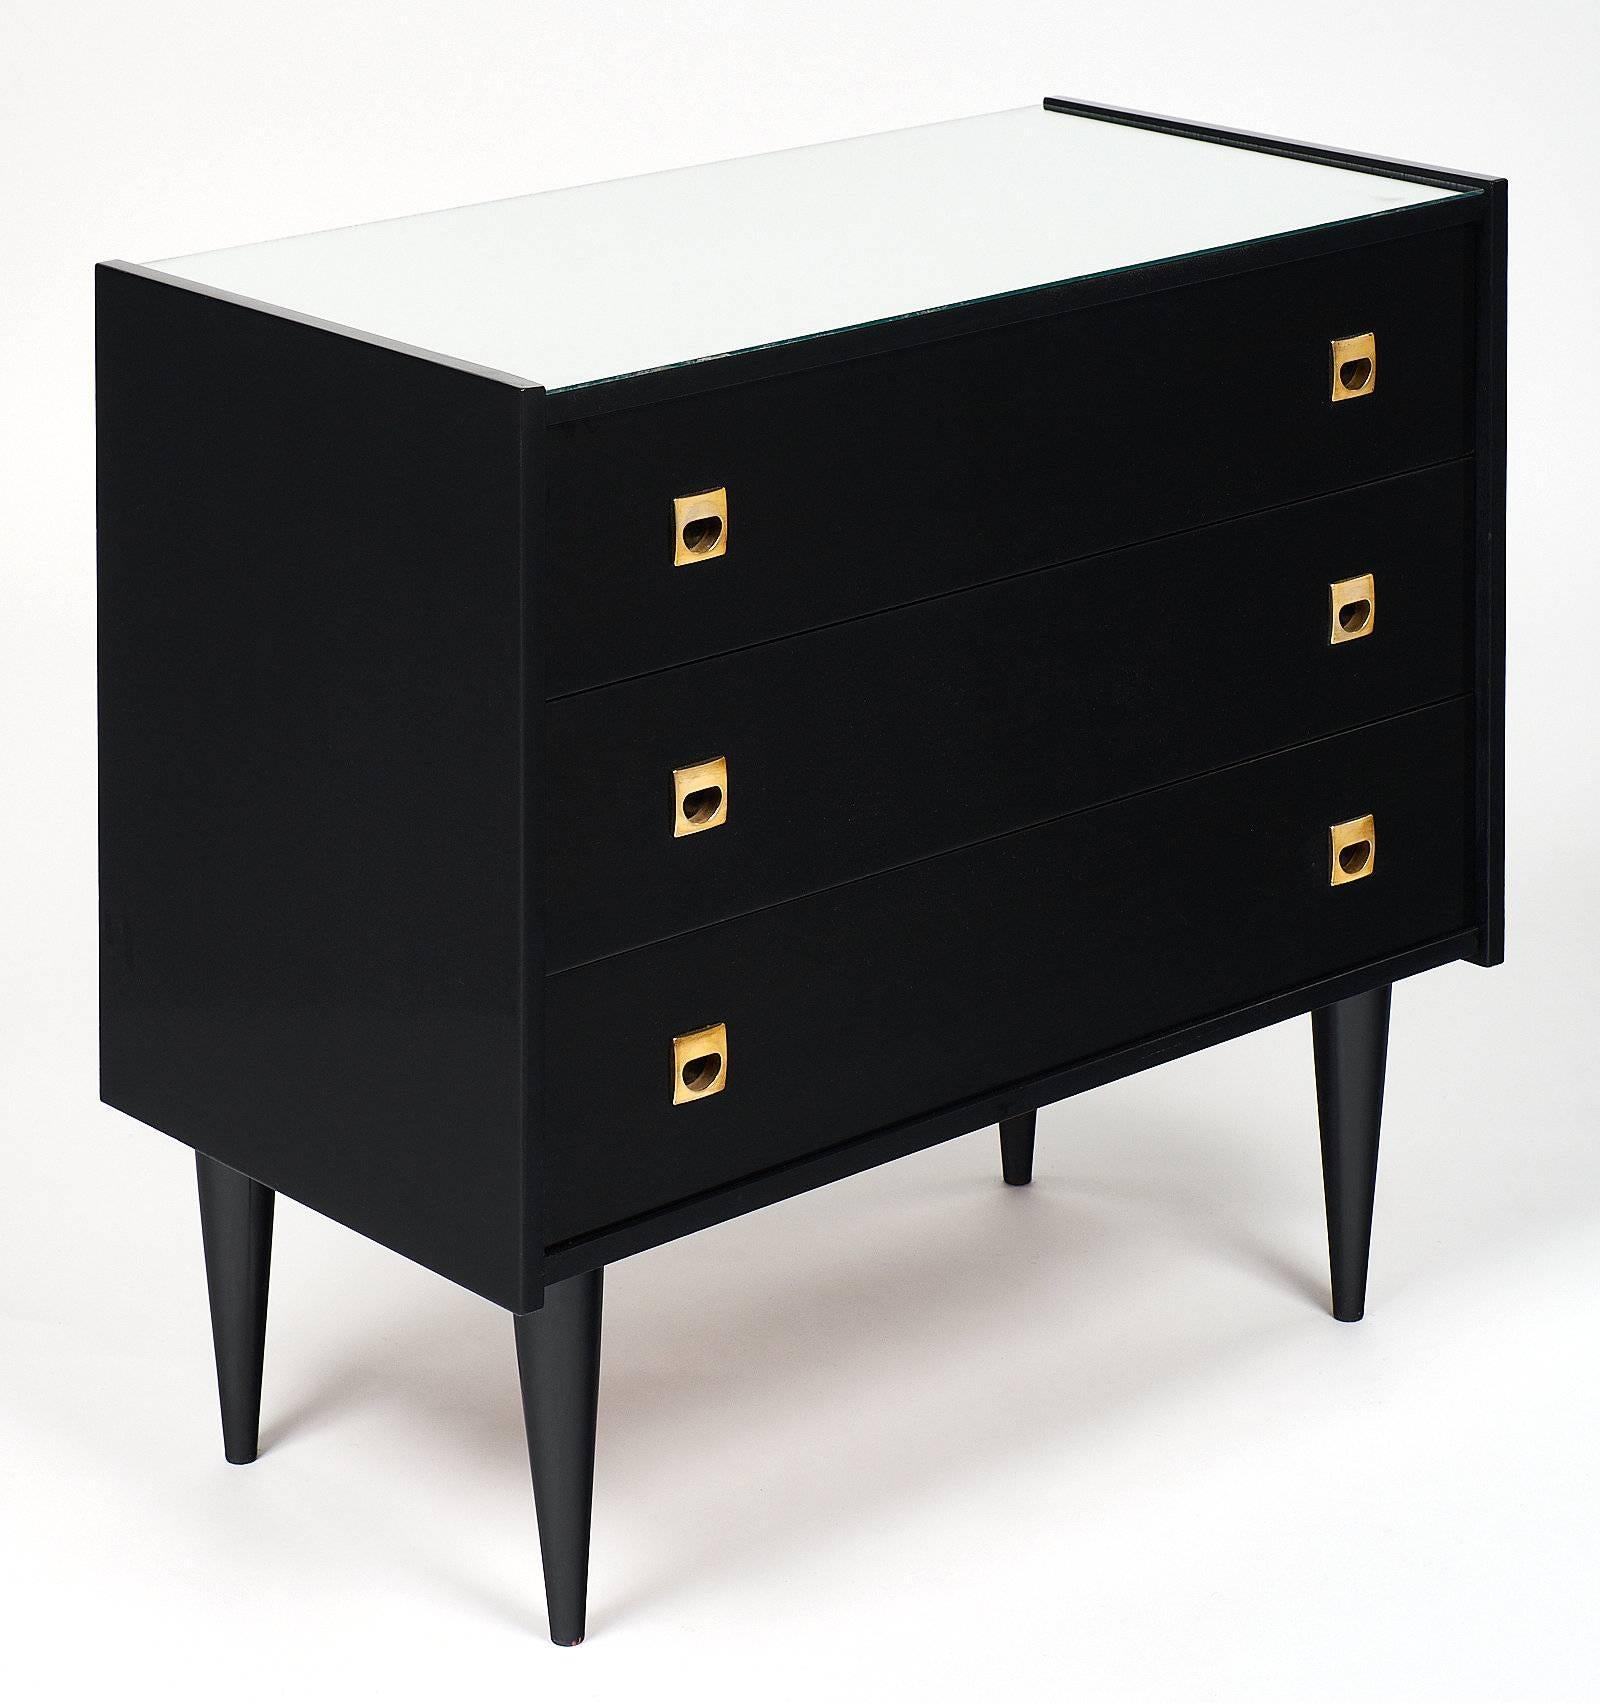 A French midcentury chest of drawers in ebonized cherrywood, finished with a high gloss French polish and a mirrored top. The three drawers each feature two inserted solid gilt brass handles. We love the quintessential Mid-Century Modern tapered